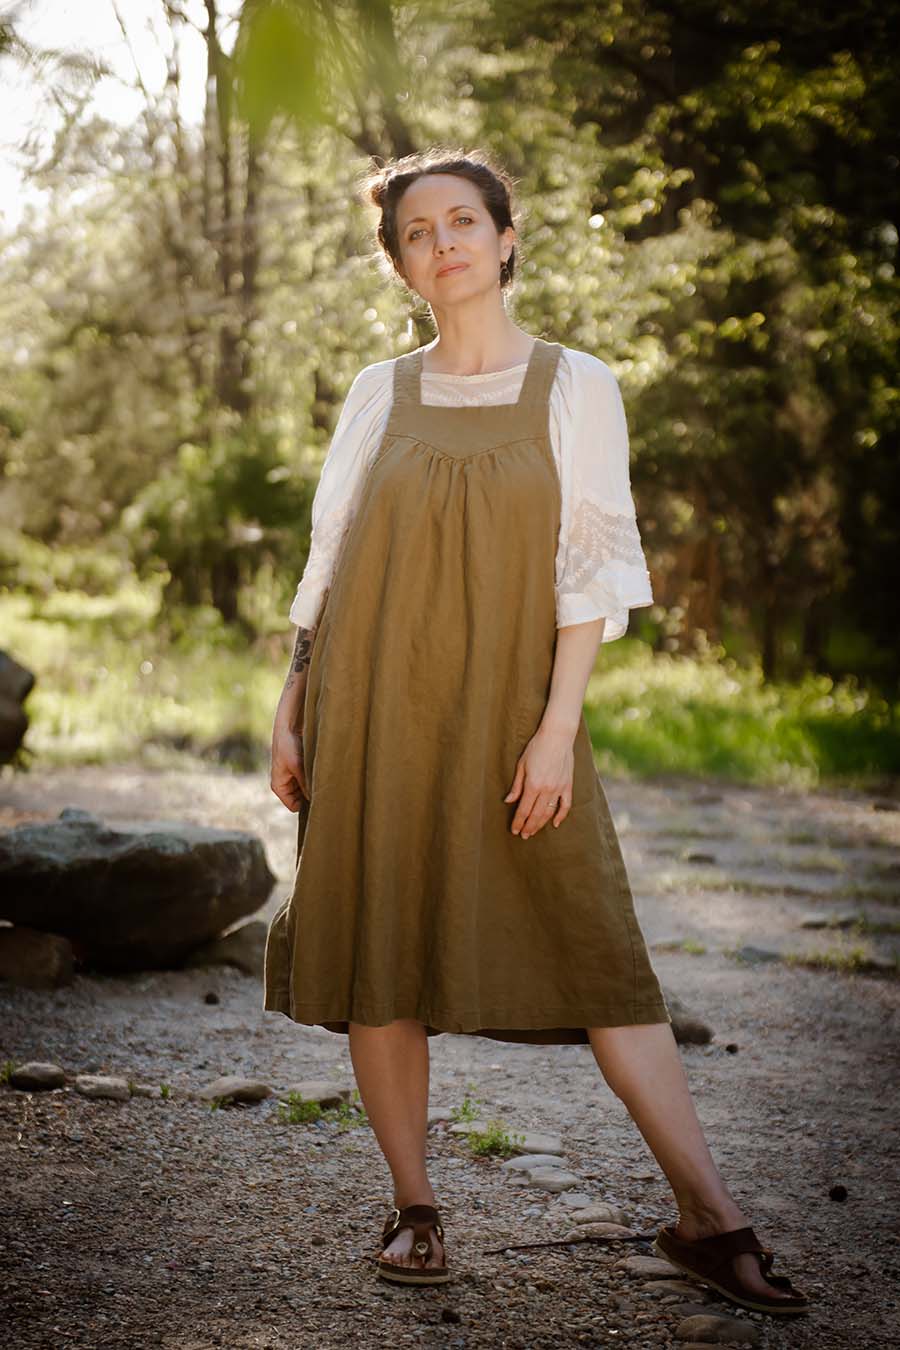 Woman wearing the Petrichor Pinafore sewing pattern from Sew Liberated on The Fold Line. A dress pattern made in washed linen, linen-rayon blends, or silk noil fabric, featuring an easy fit, A-line shape, wide straps, low armholes, and a yoke with gathers.